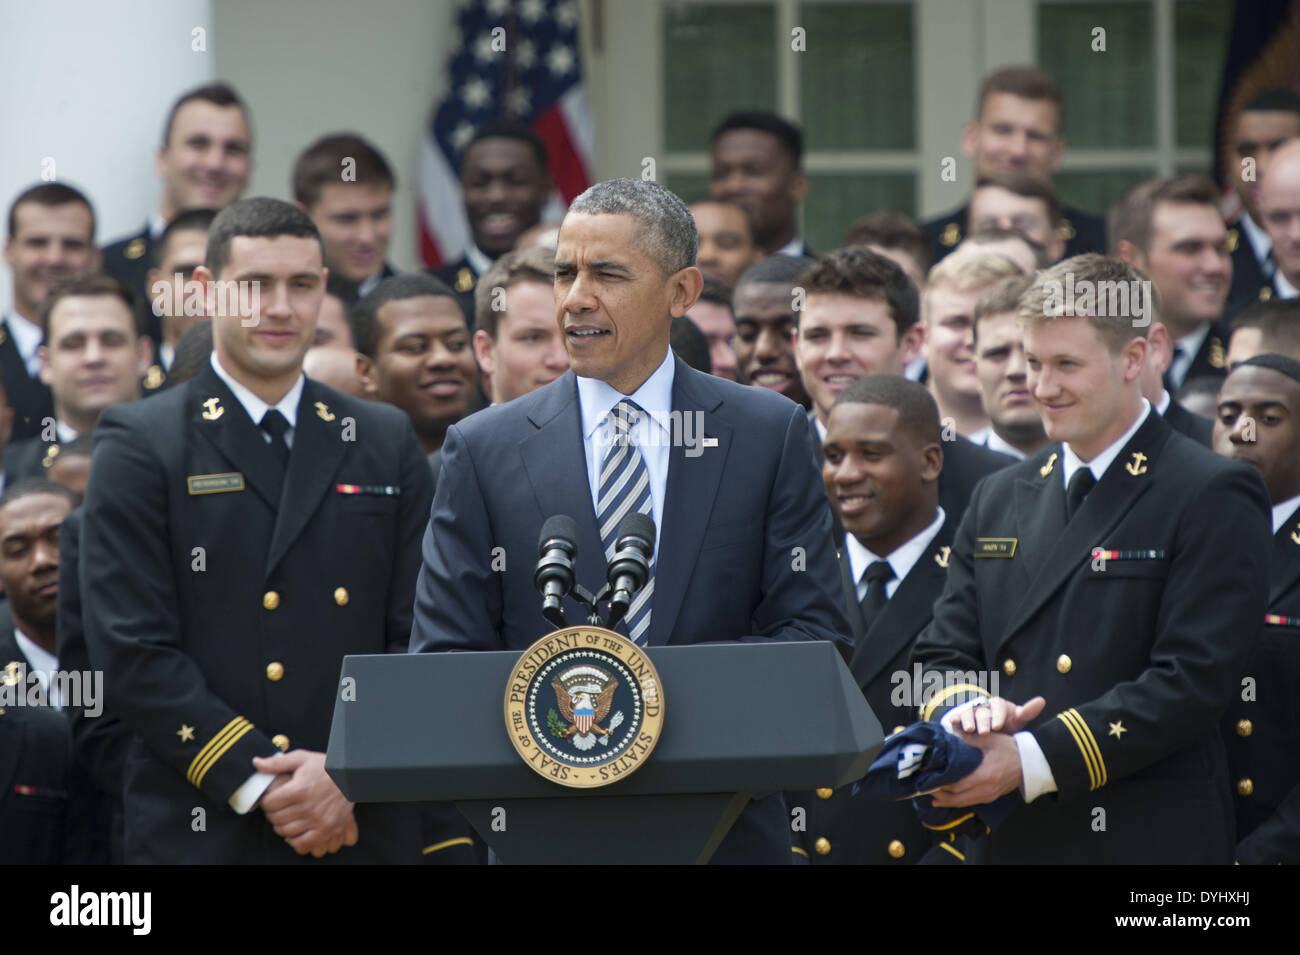 Washington, District Of Columbia, USA. 18th Apr, 2014. PRESIDENT OBAMA welcomes the Naval Academy Midshipmen Football Team to the White House to present them with the 2013 Commander-in-Chief Bowl. The ceremony was held in the Rose Garden of the White House Credit:  Ricky Fitchett/ZUMAPRESS.com/Alamy Live News Stock Photo